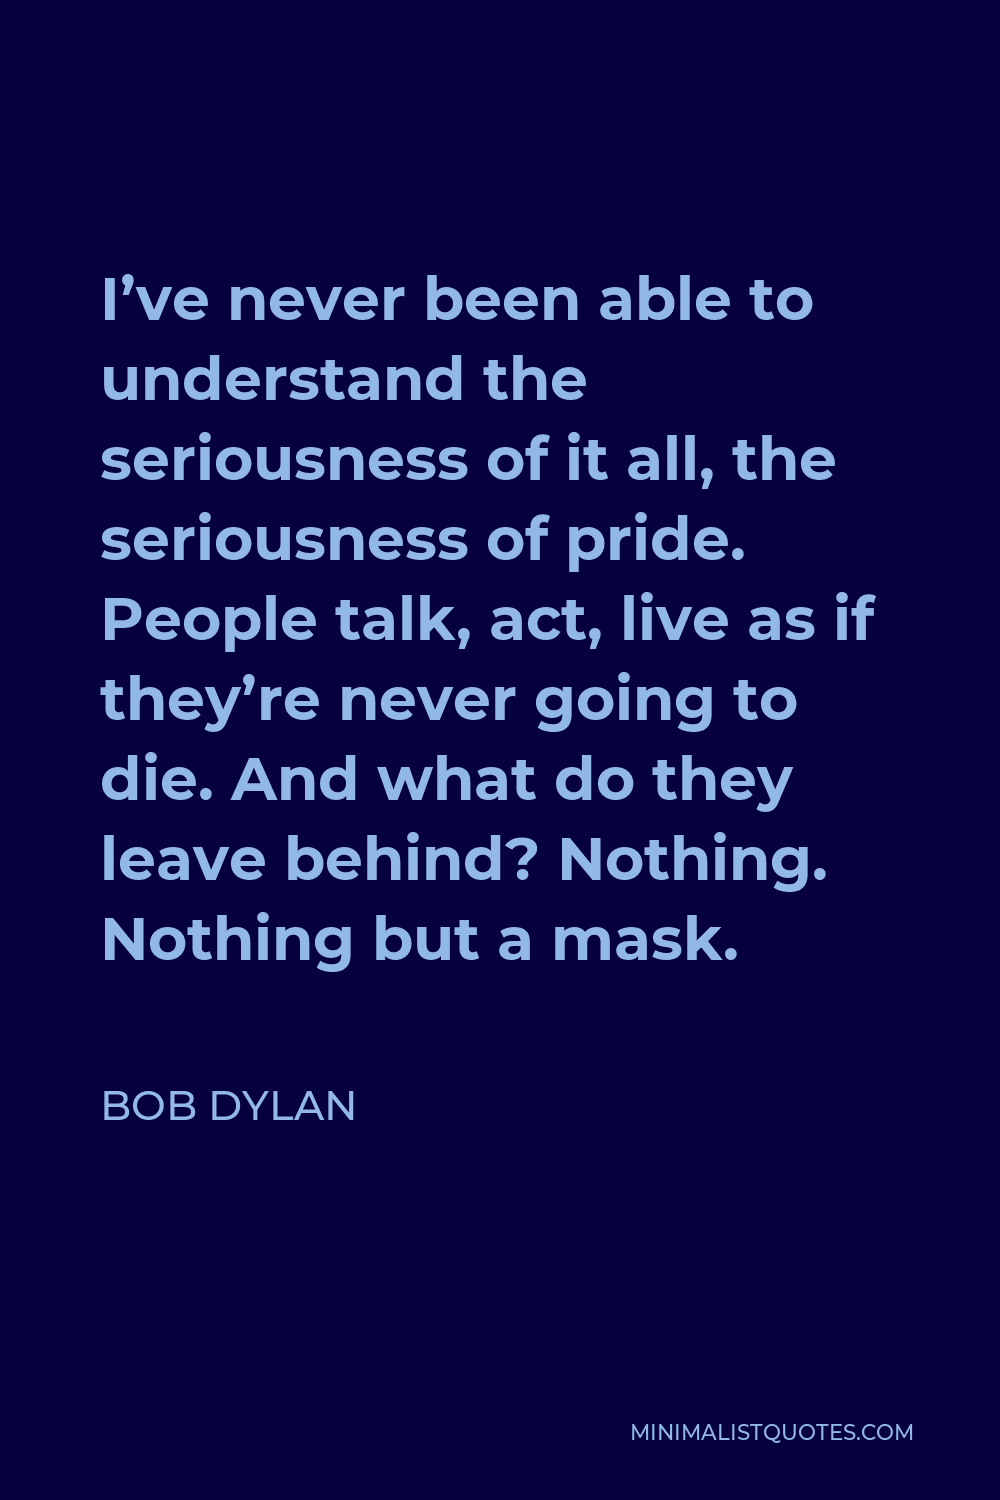 Bob Dylan Quote - I’ve never been able to understand the seriousness of it all, the seriousness of pride. People talk, act, live as if they’re never going to die. And what do they leave behind? Nothing. Nothing but a mask.